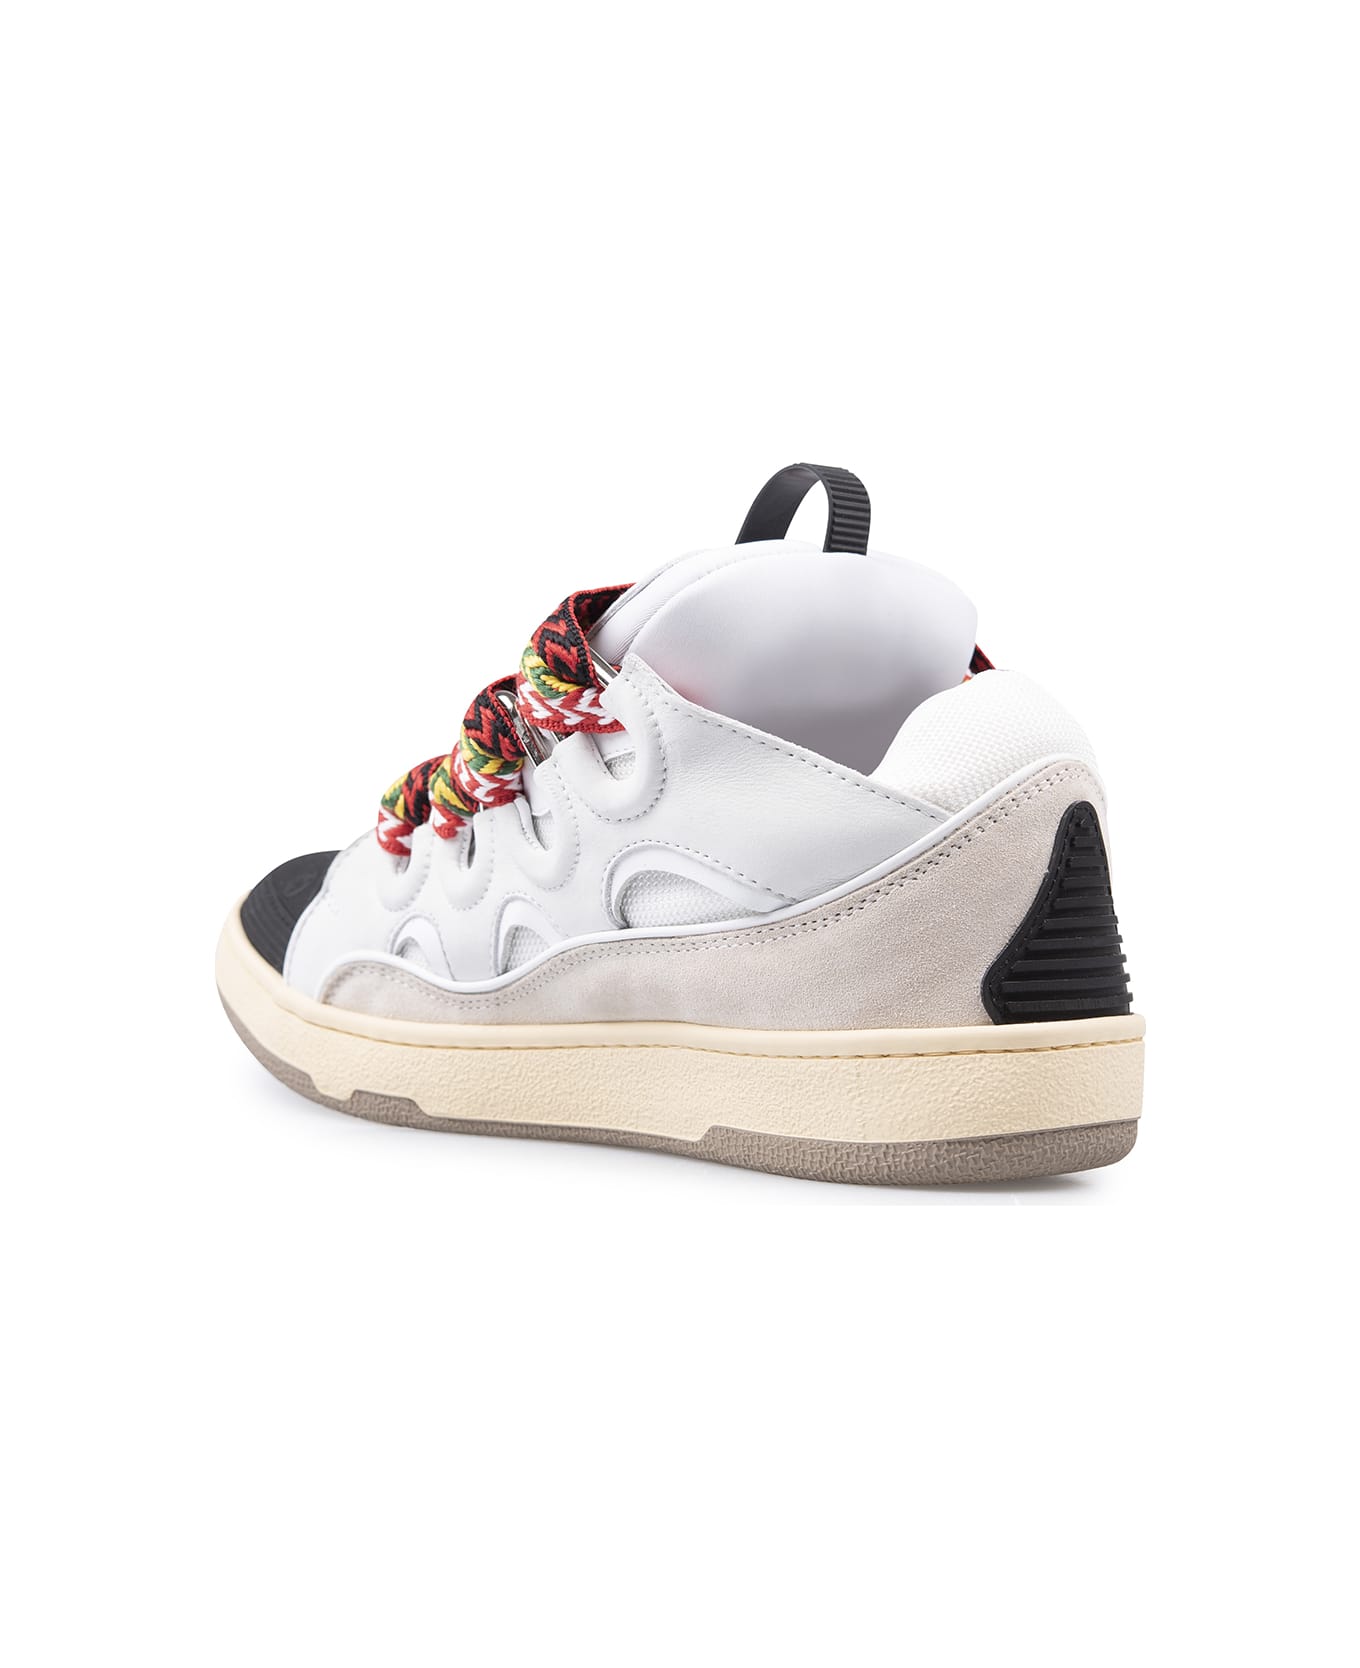 Lanvin "curb" Sneakers In White Leather - White